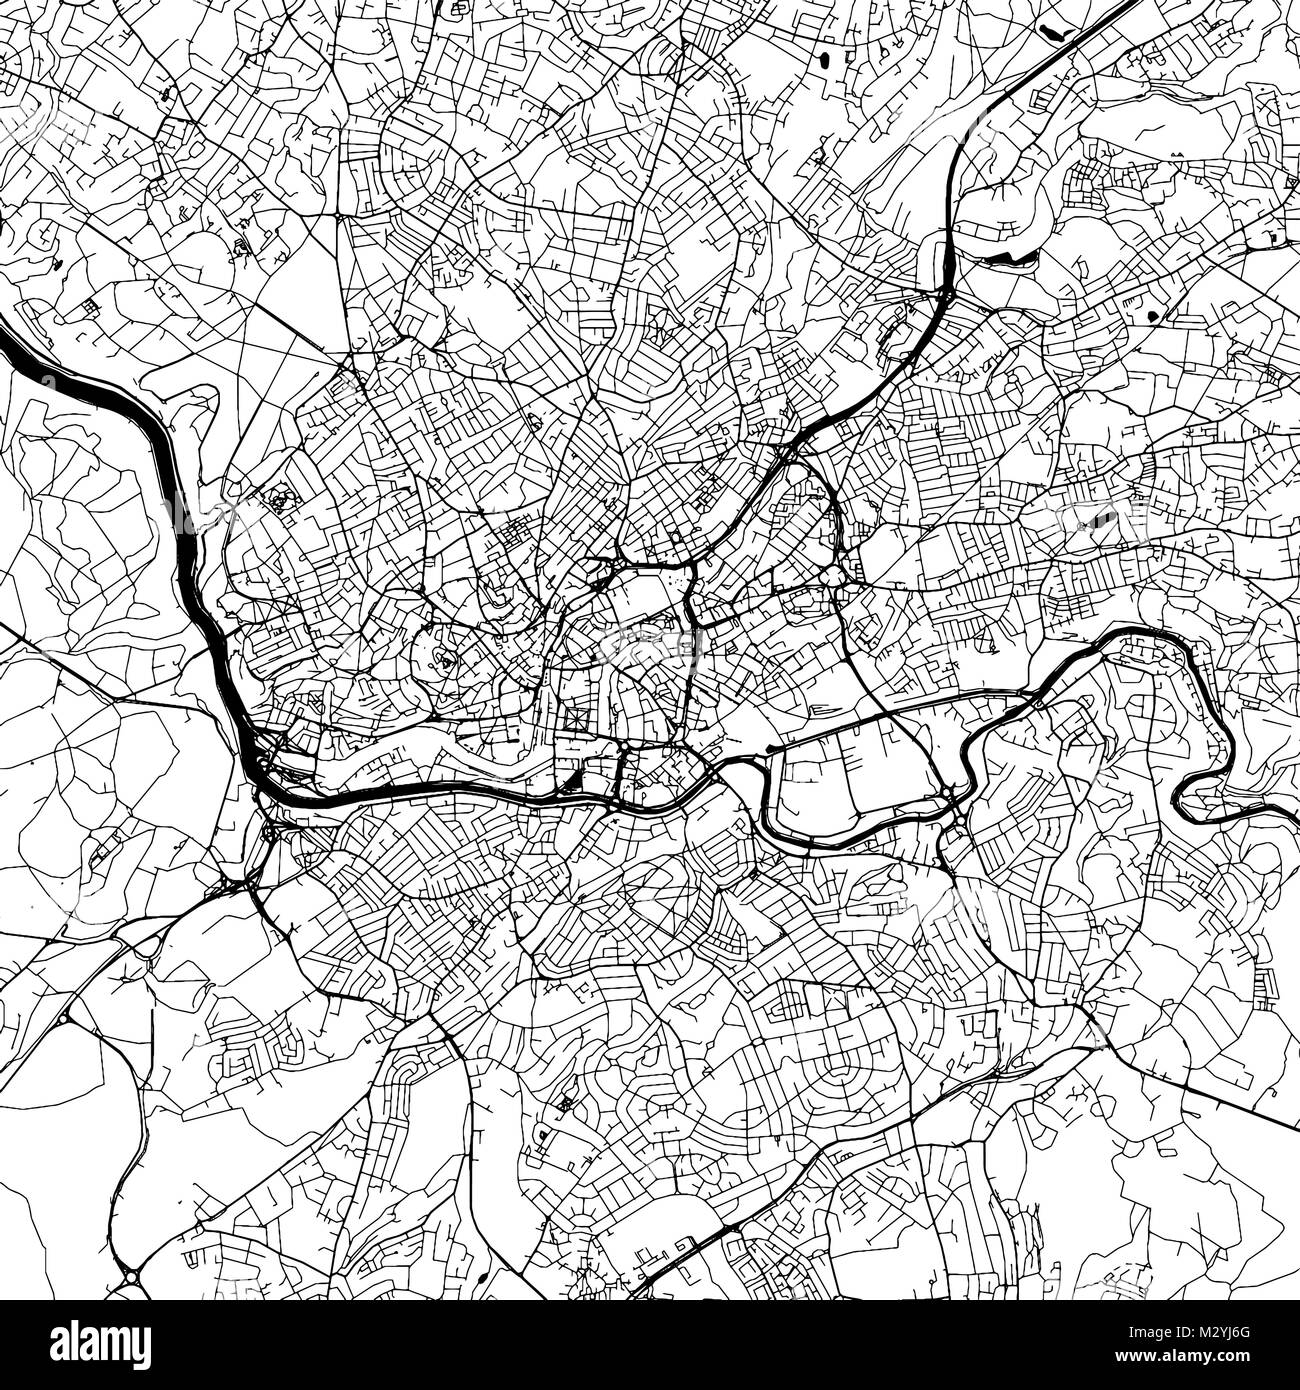 Bristol Downtown Vector Map Monochrome Artprint, Outline Version for Infographic Background, Black Streets and Waterways Stock Vector